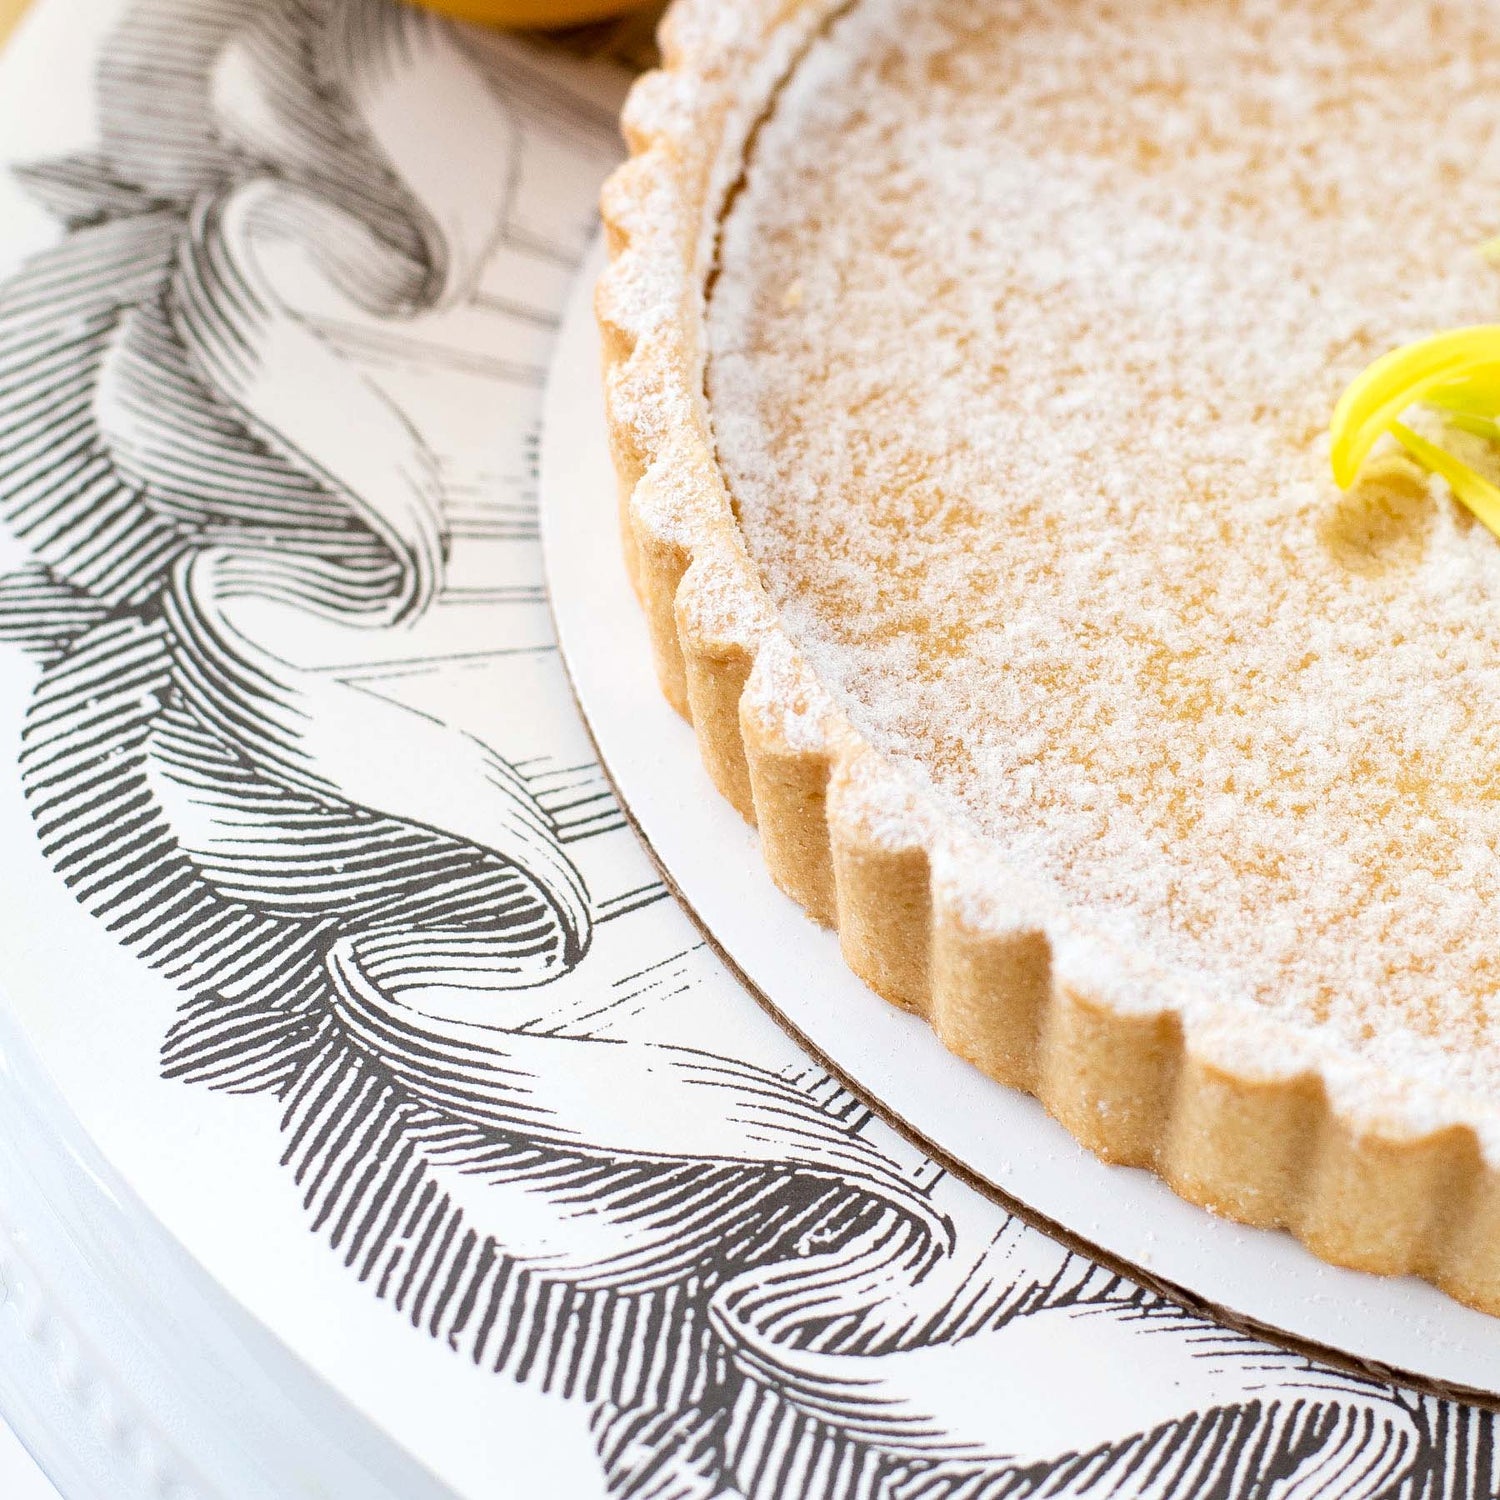 A Rosette Serving Papers lemon tart on a plate by Hester &amp; Cook.